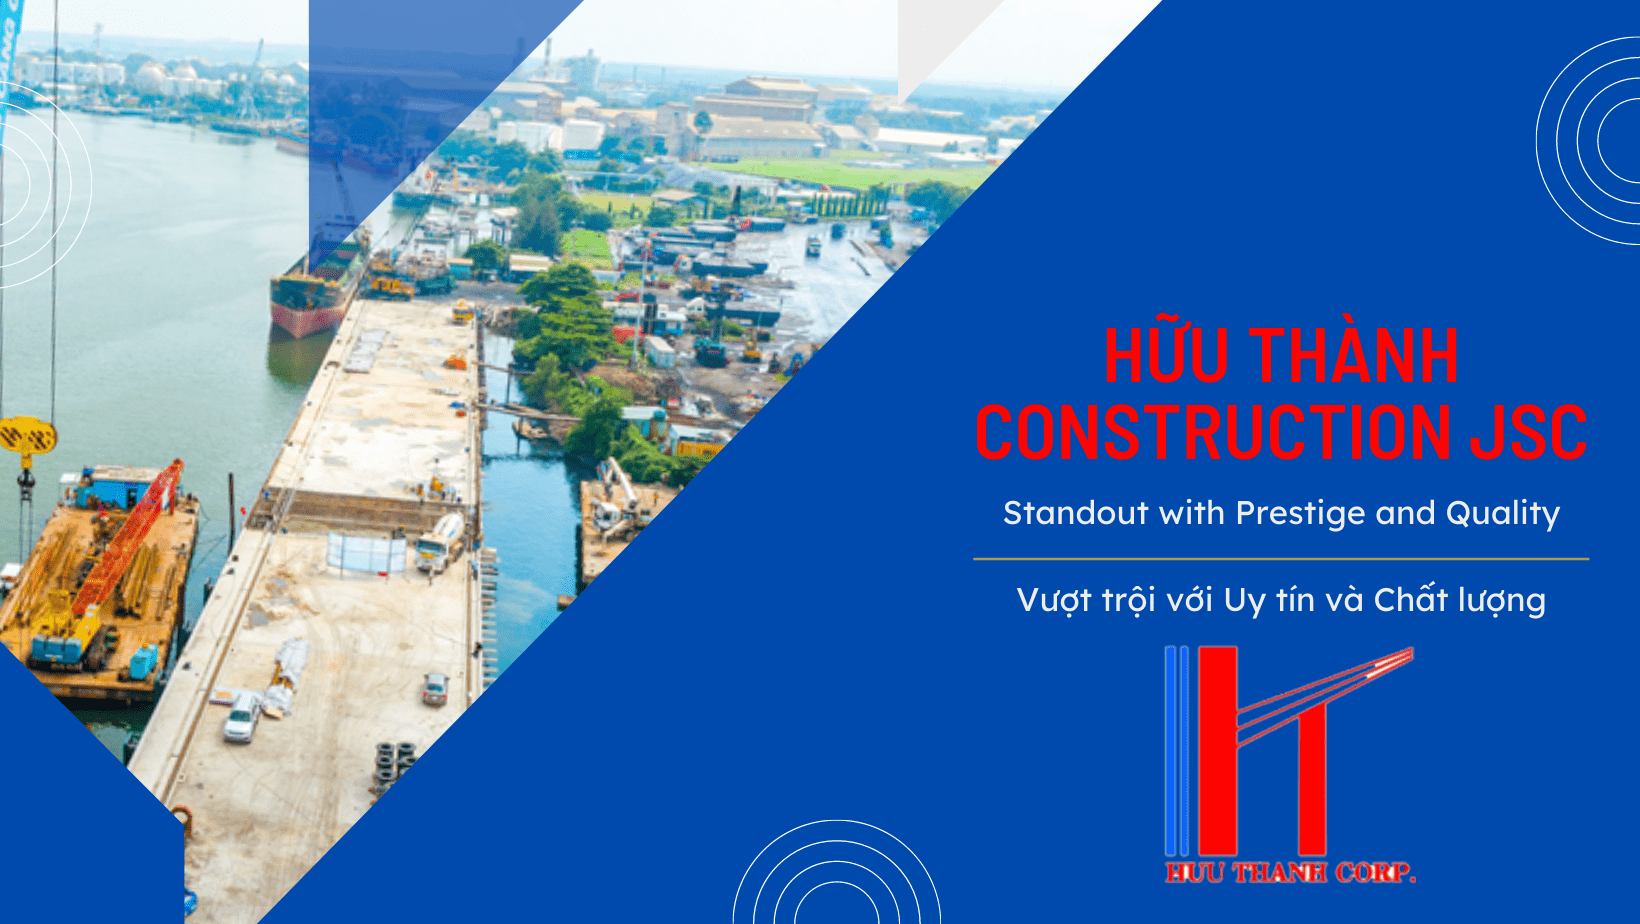 About-Huu-Thanh-Construction-Corporation